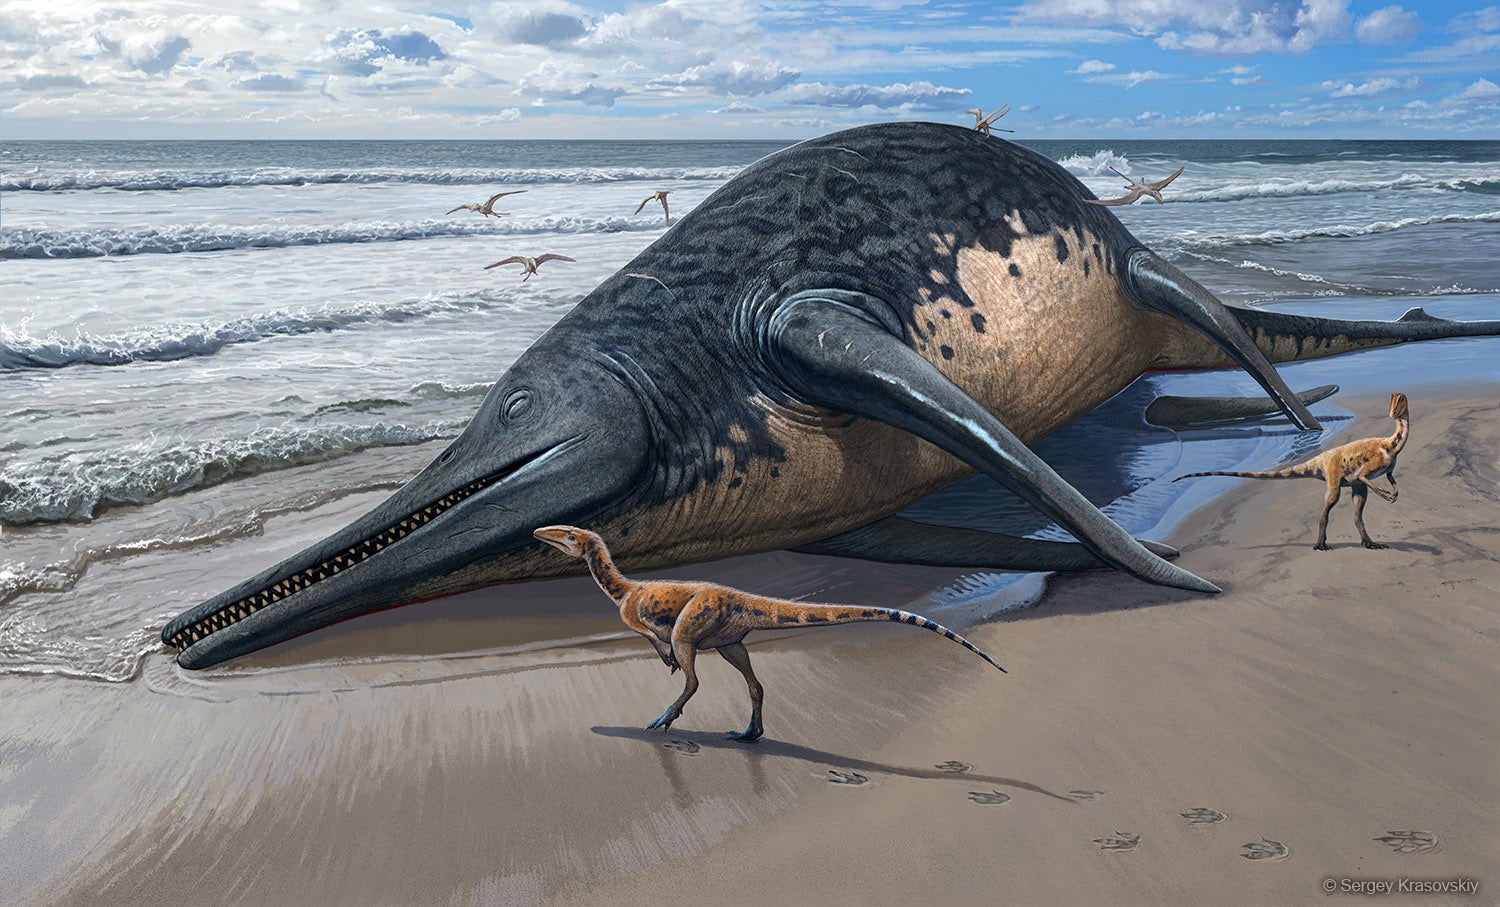 Giant ichthyosaurs disappeared after the Late Triassic global mass extinction event, according to scientists.